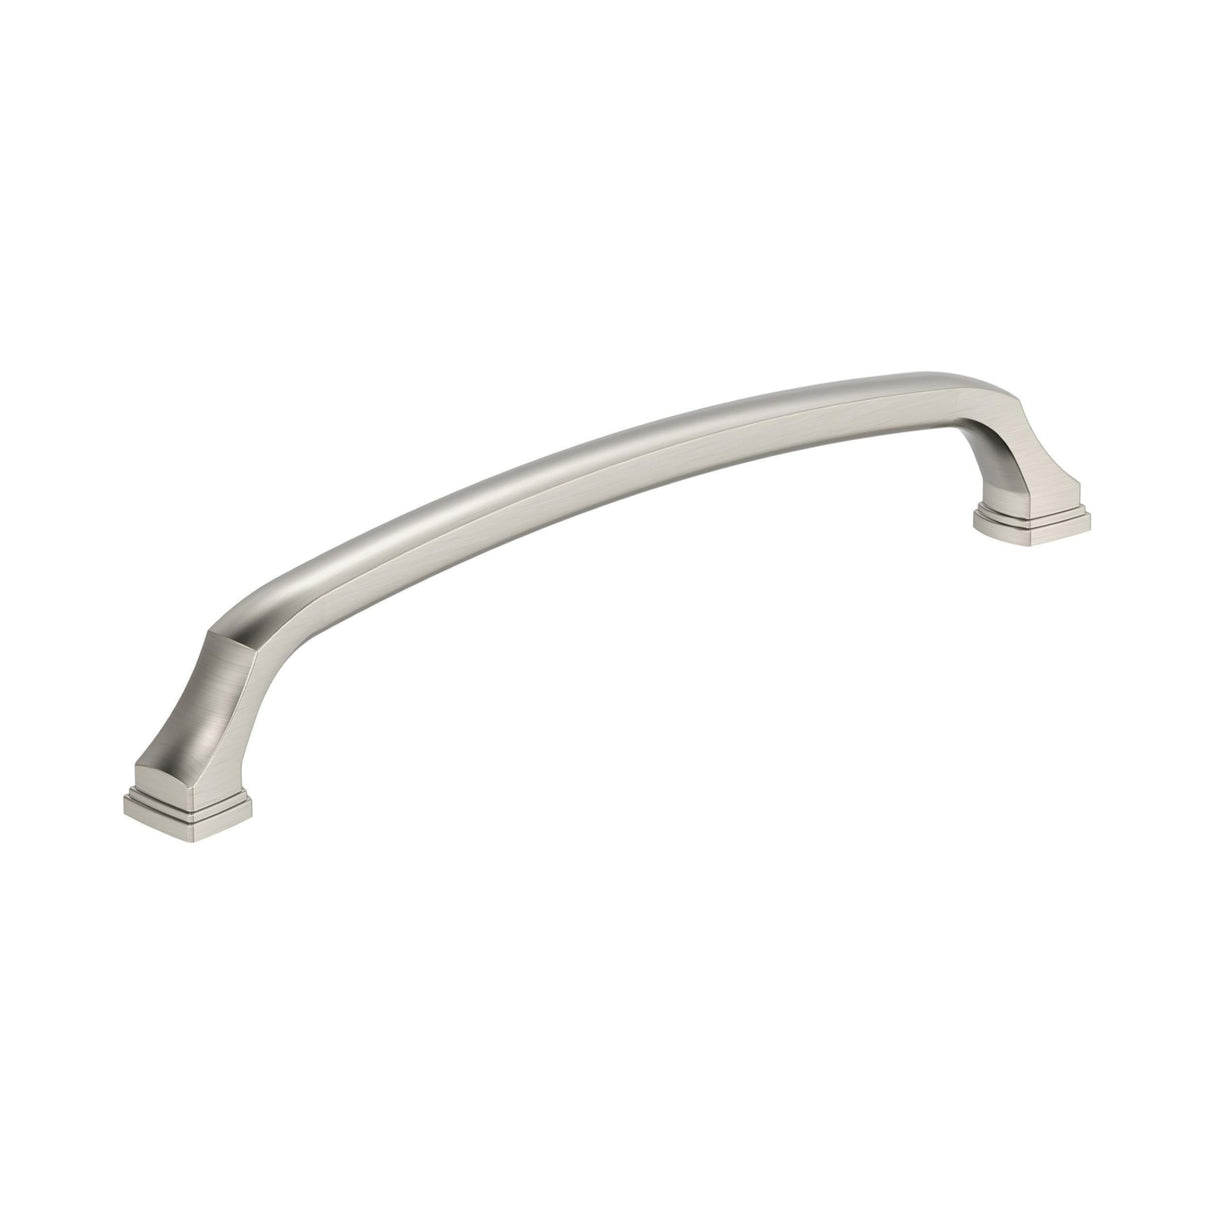 Amerock BP55351G10 Satin Nickel Cabinet Pull 8 in (203 mm) Center-to-Center Cabinet Handle Revitalize Drawer Pull Kitchen Cabinet Handle Furniture Hardware